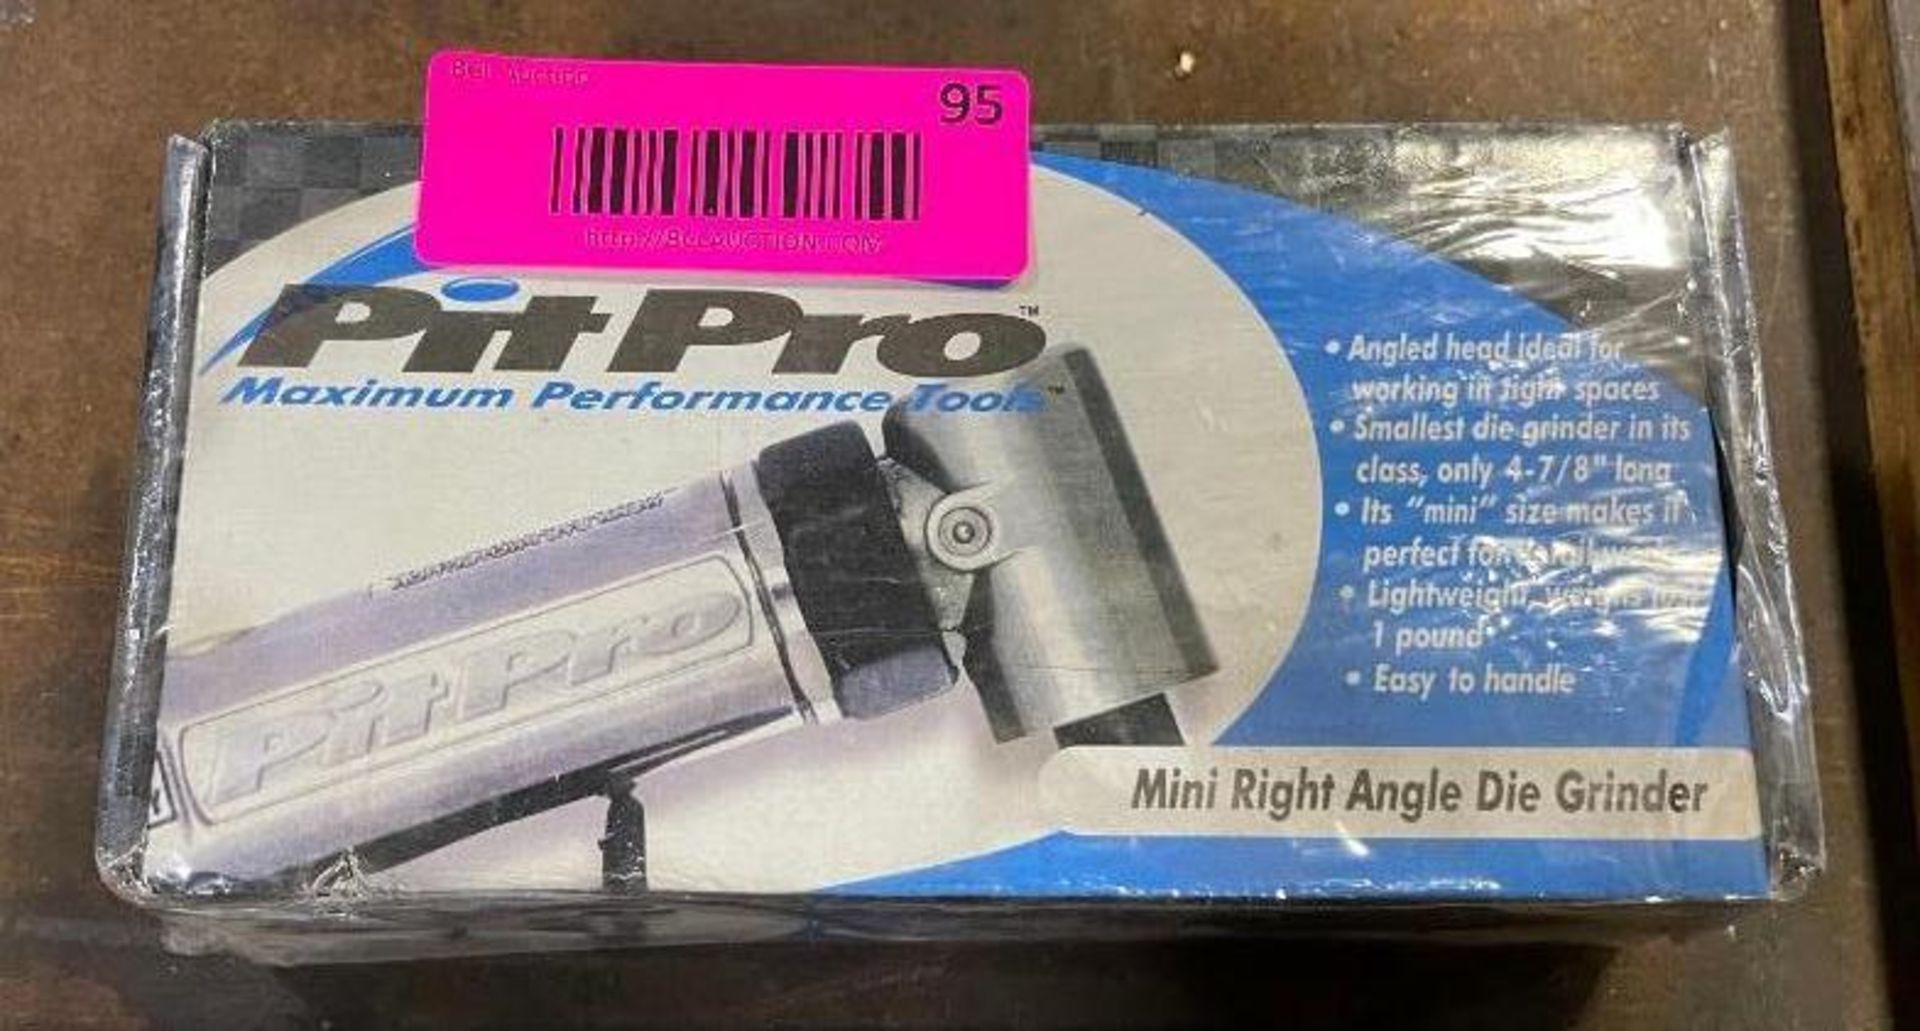 MINI RIGHT ANGLE DIE GRINDER (NEW) BRAND/MODEL: PITPRO PT2412 LOCATION: WAREHOUSE QTY: 1